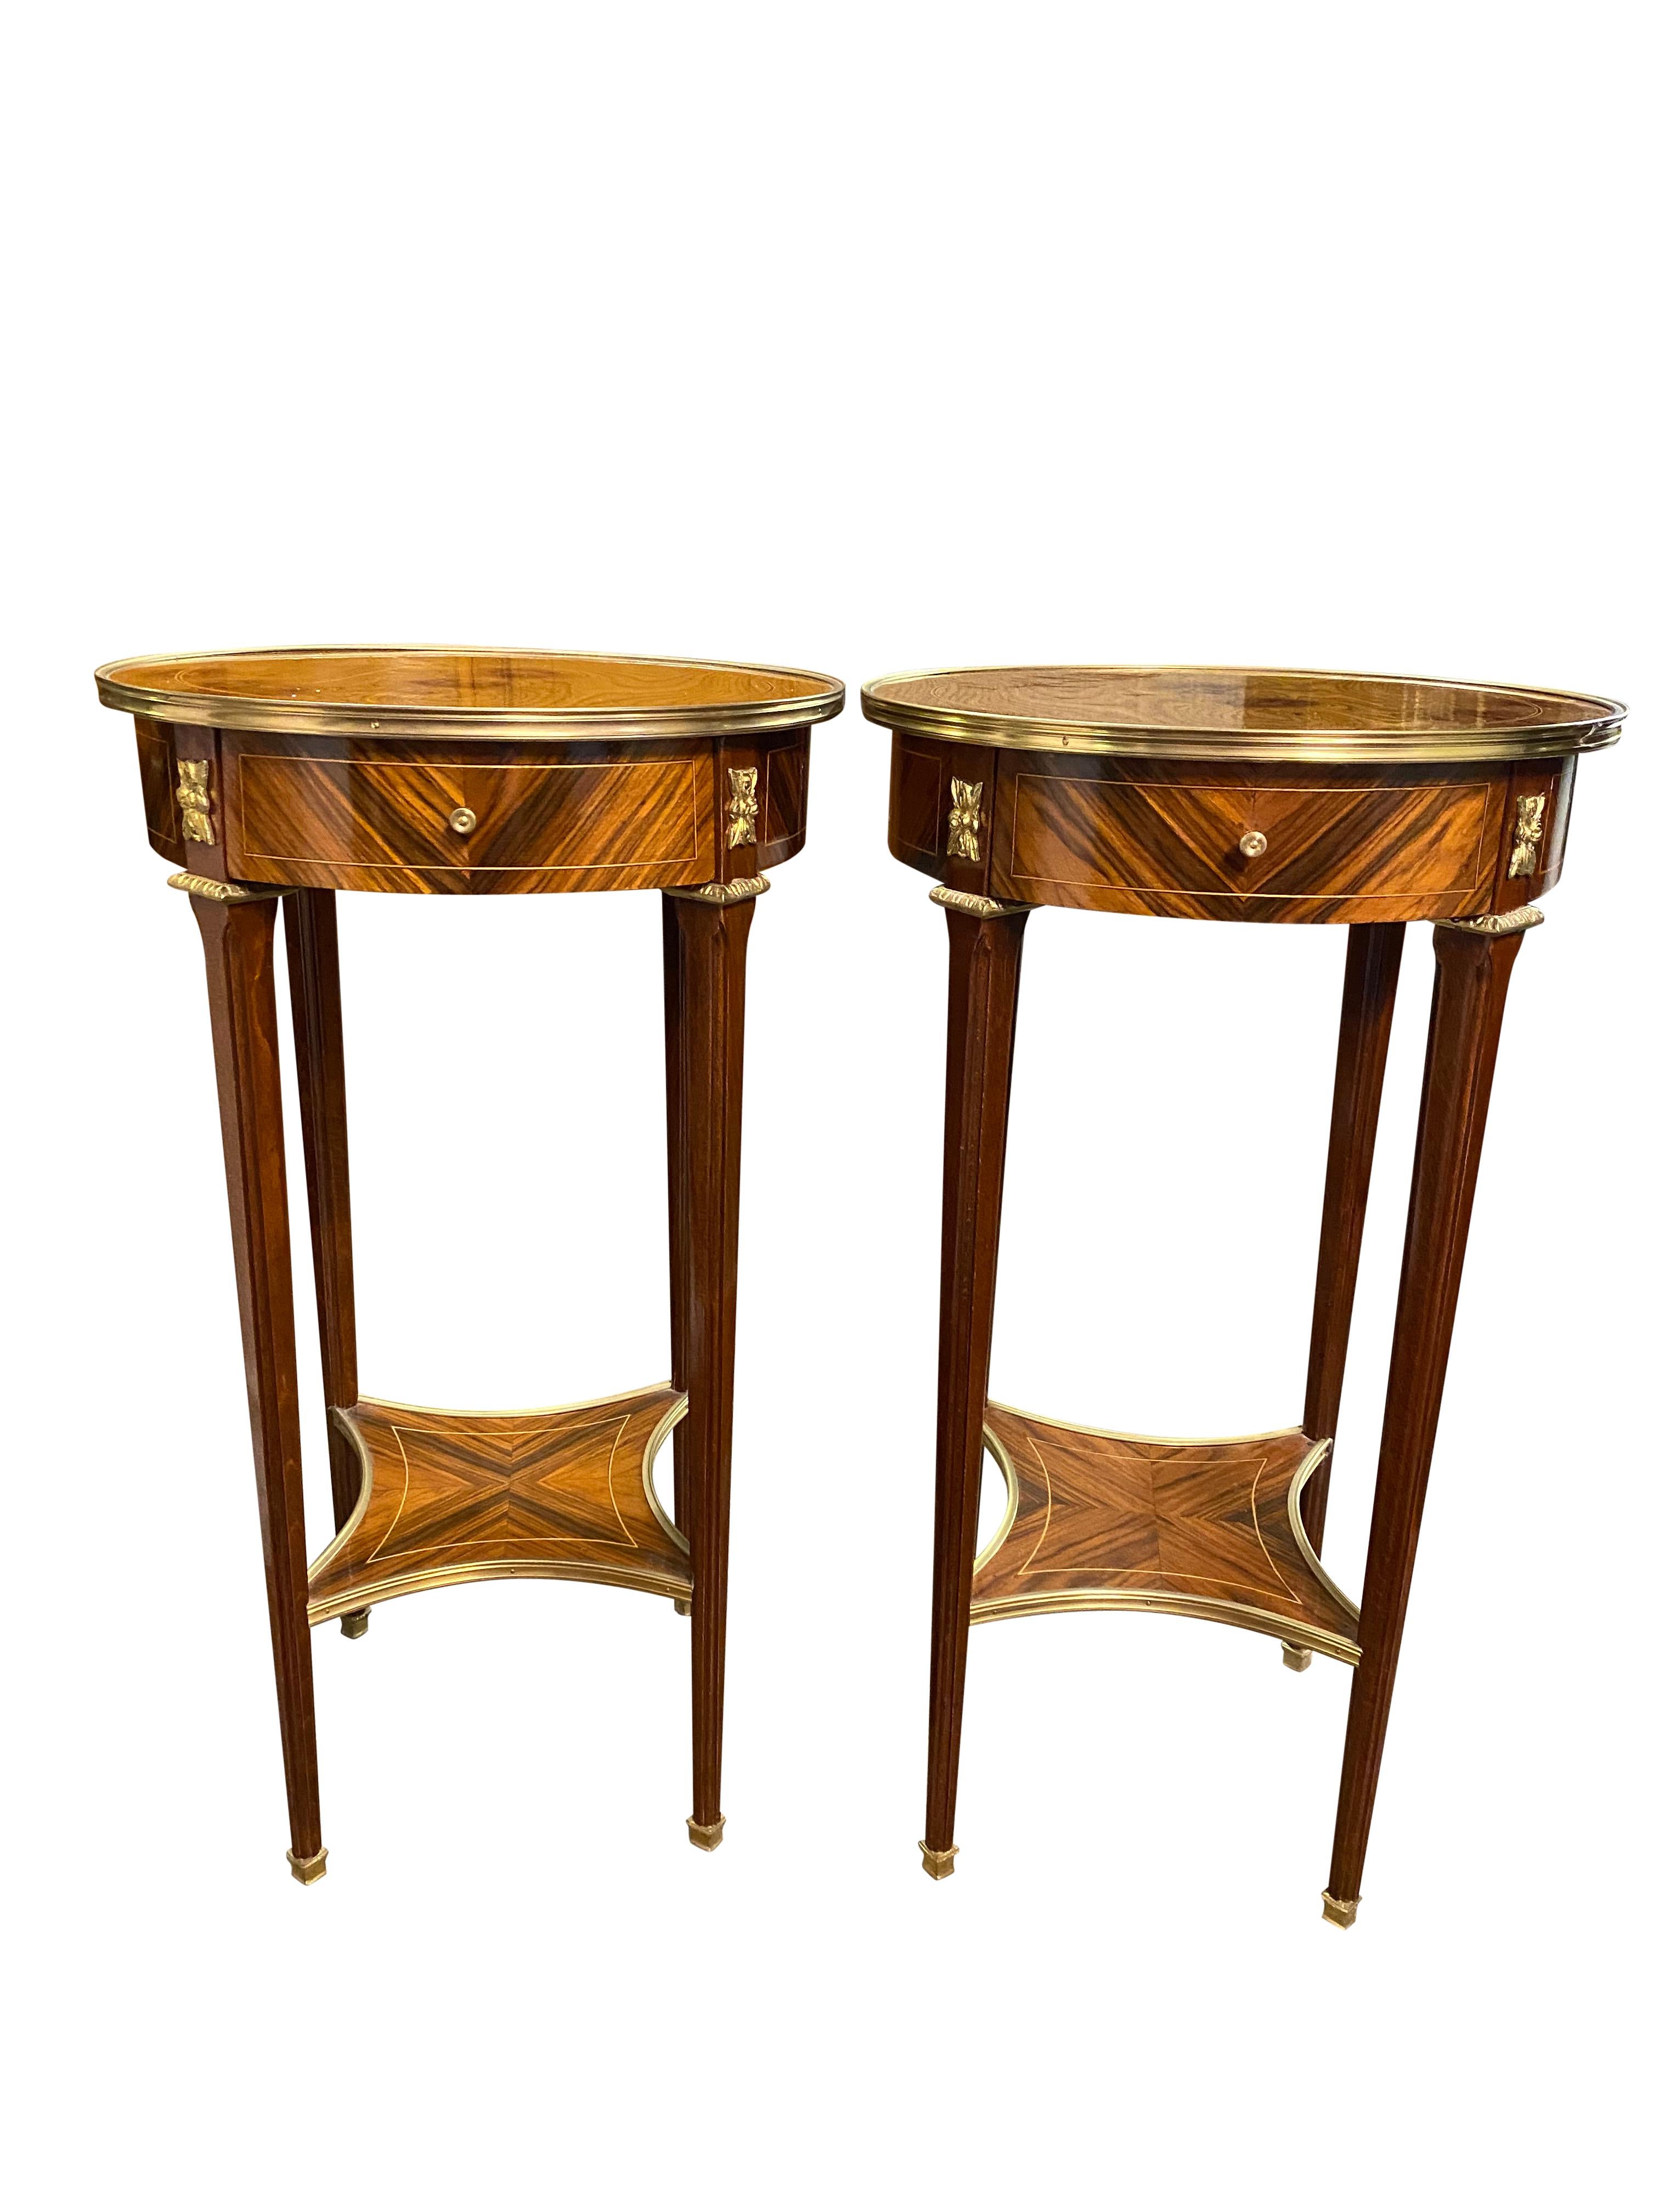 A stunning pair of oval top 20th century English Regency style side tables. A gorgeous and elegant design perfect for modern interiors.